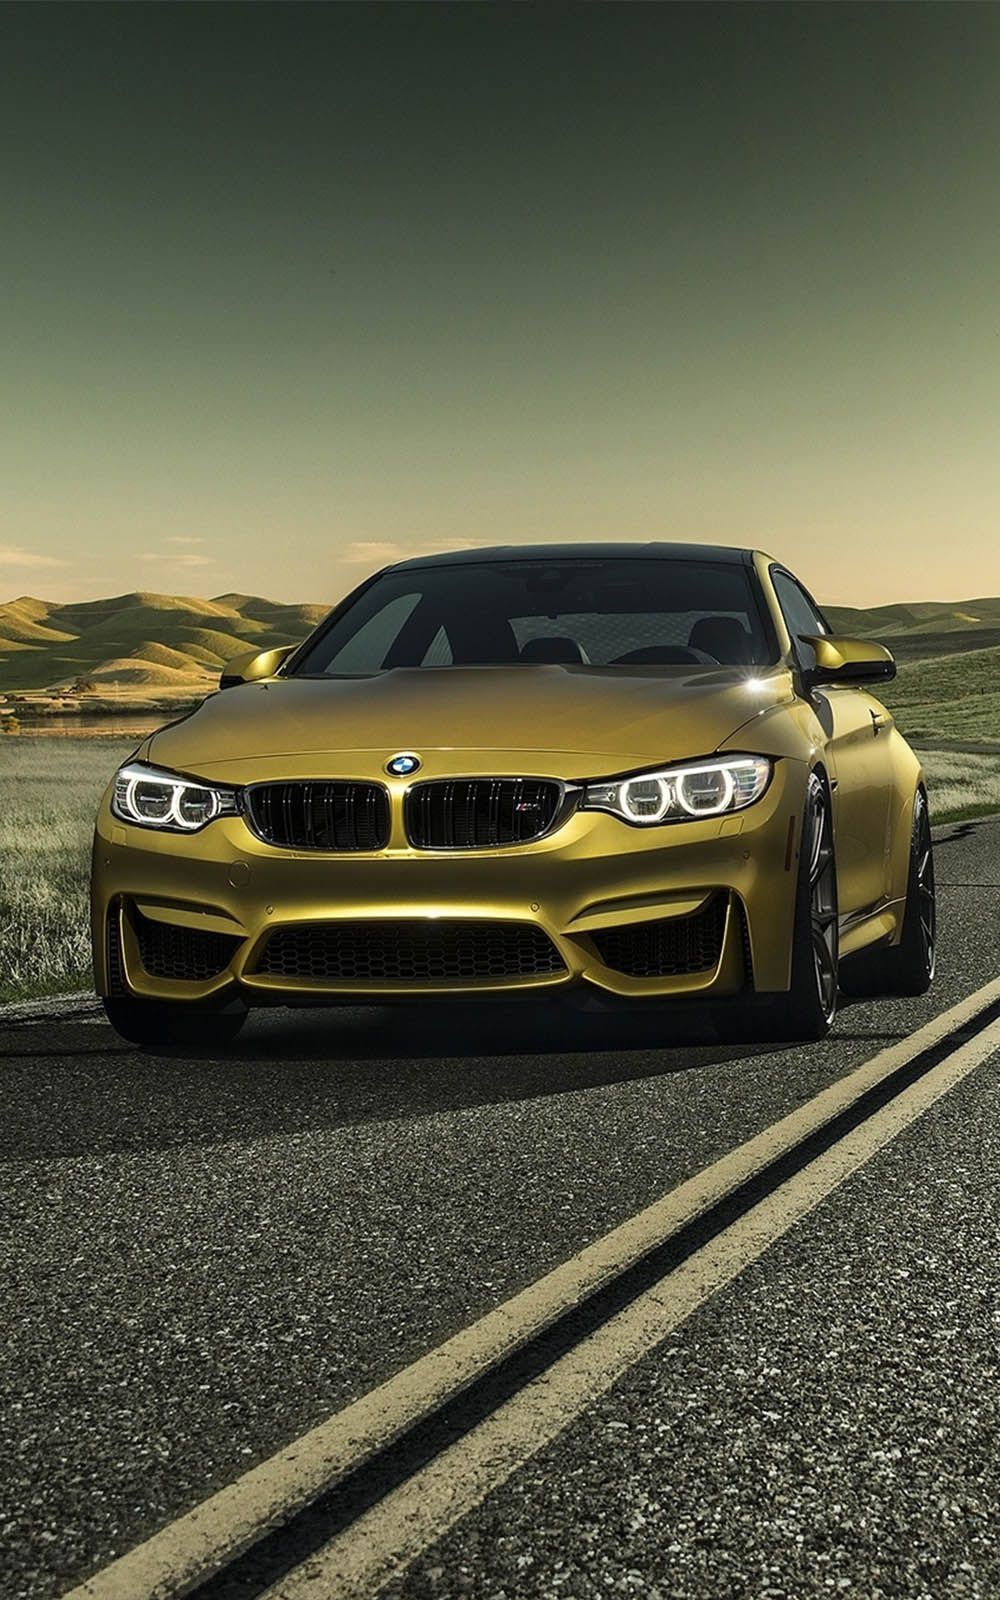 A gold BMW M4 sits on the road with the sun setting in the background. - BMW